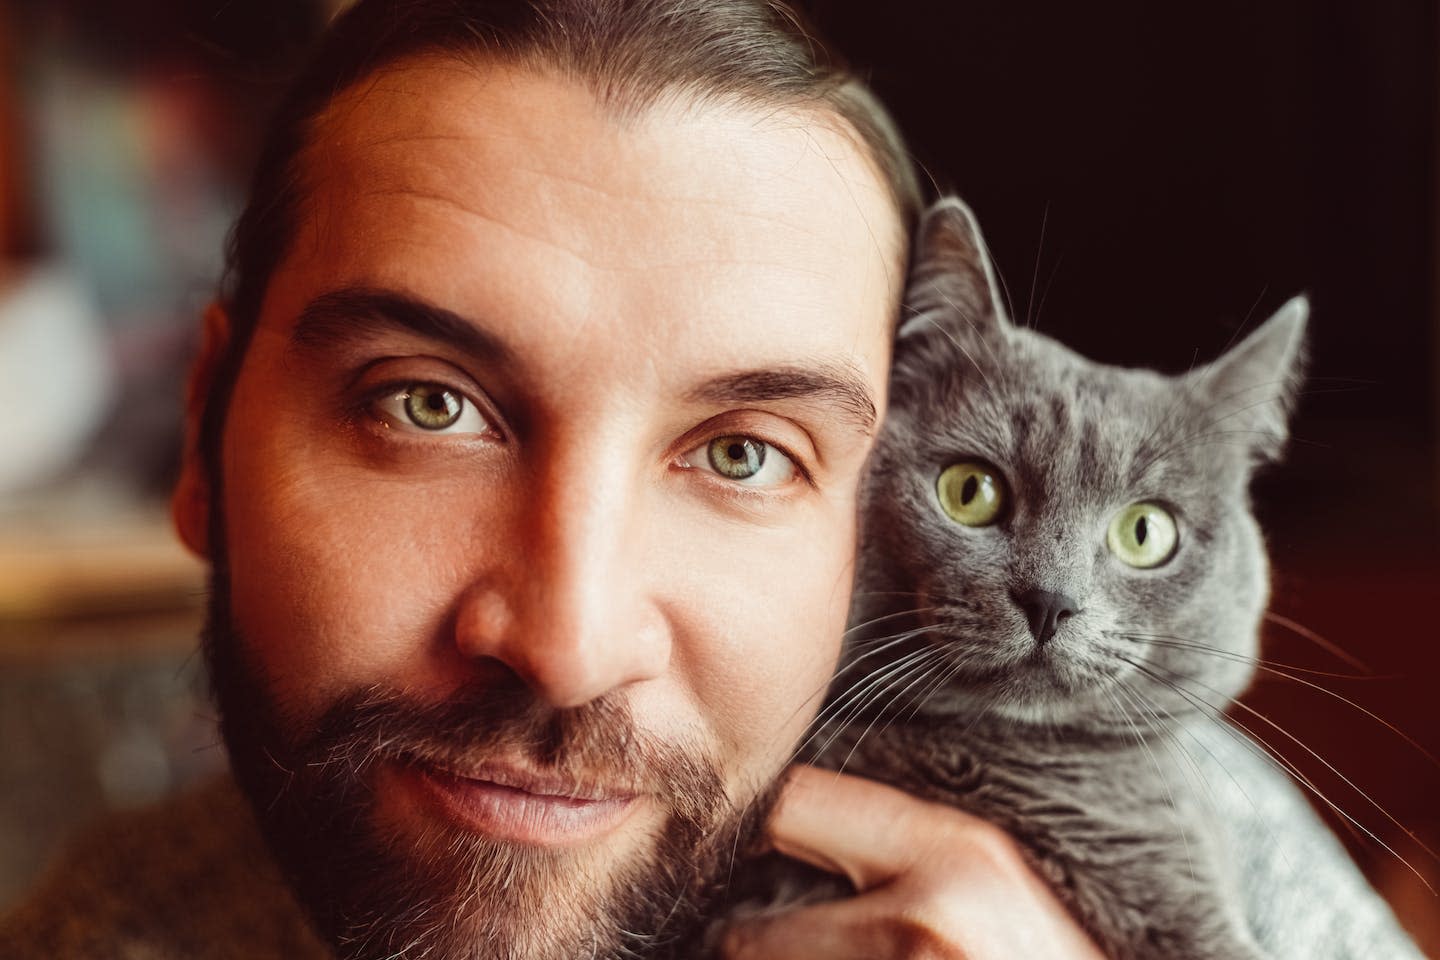 We studied what happens when guys add their cats to their dating app profiles